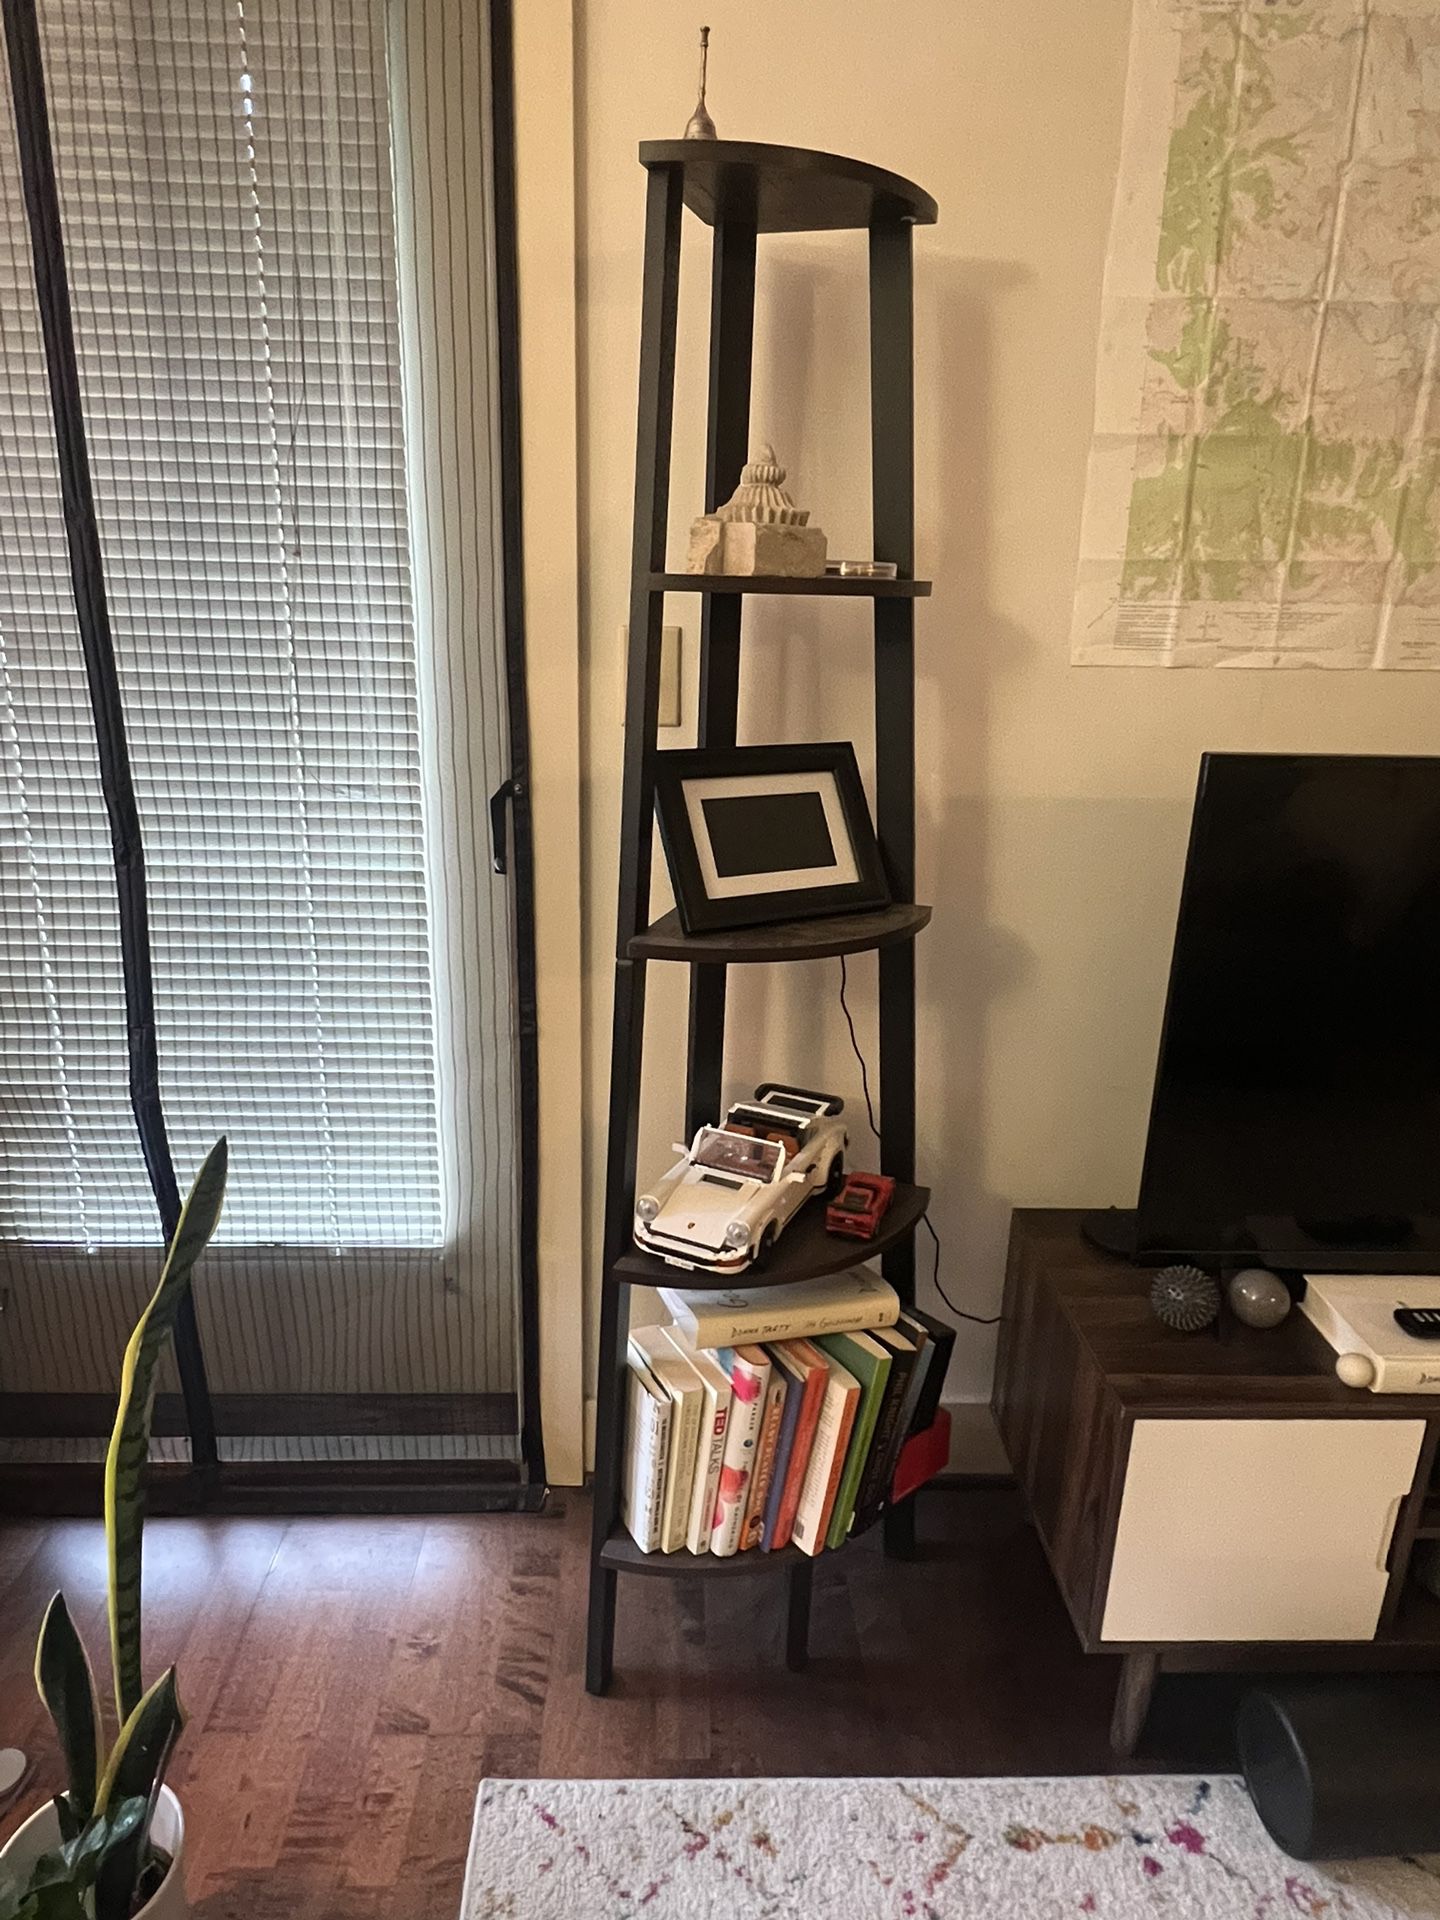 Corner Shelf - 5 Tiers [moving out sale]